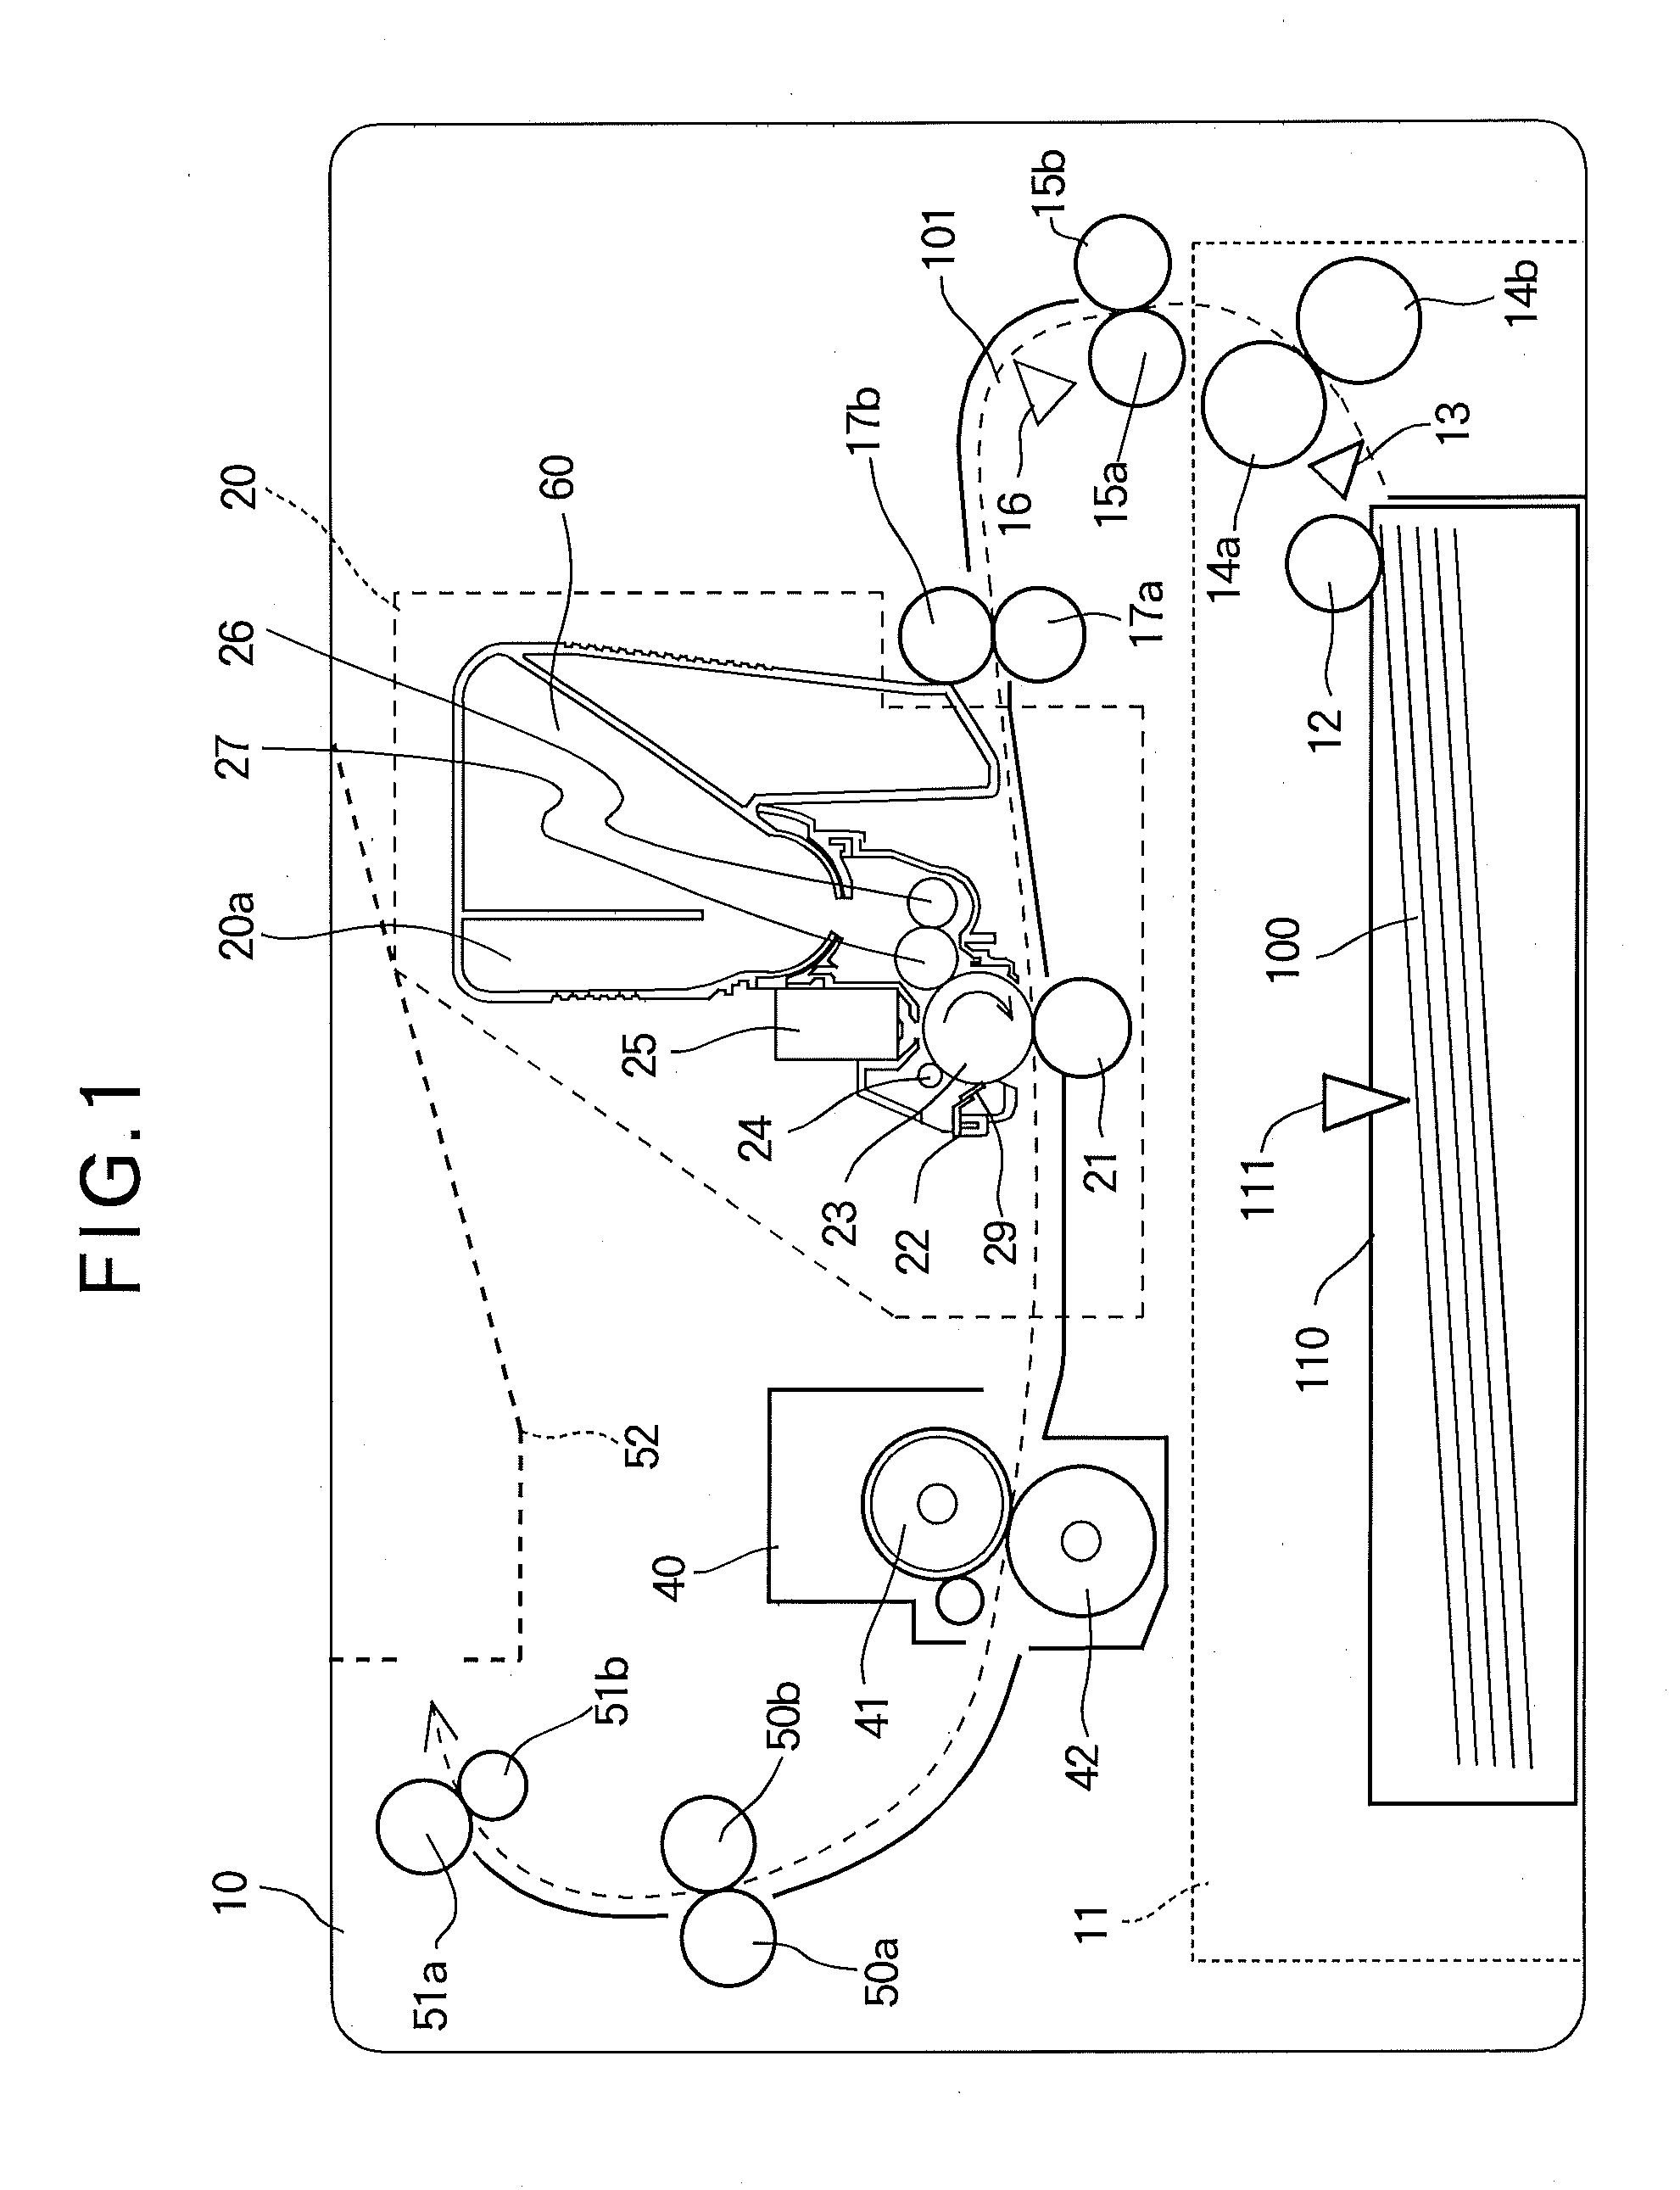 Developer storage container, image forming unit and image forming apparatus